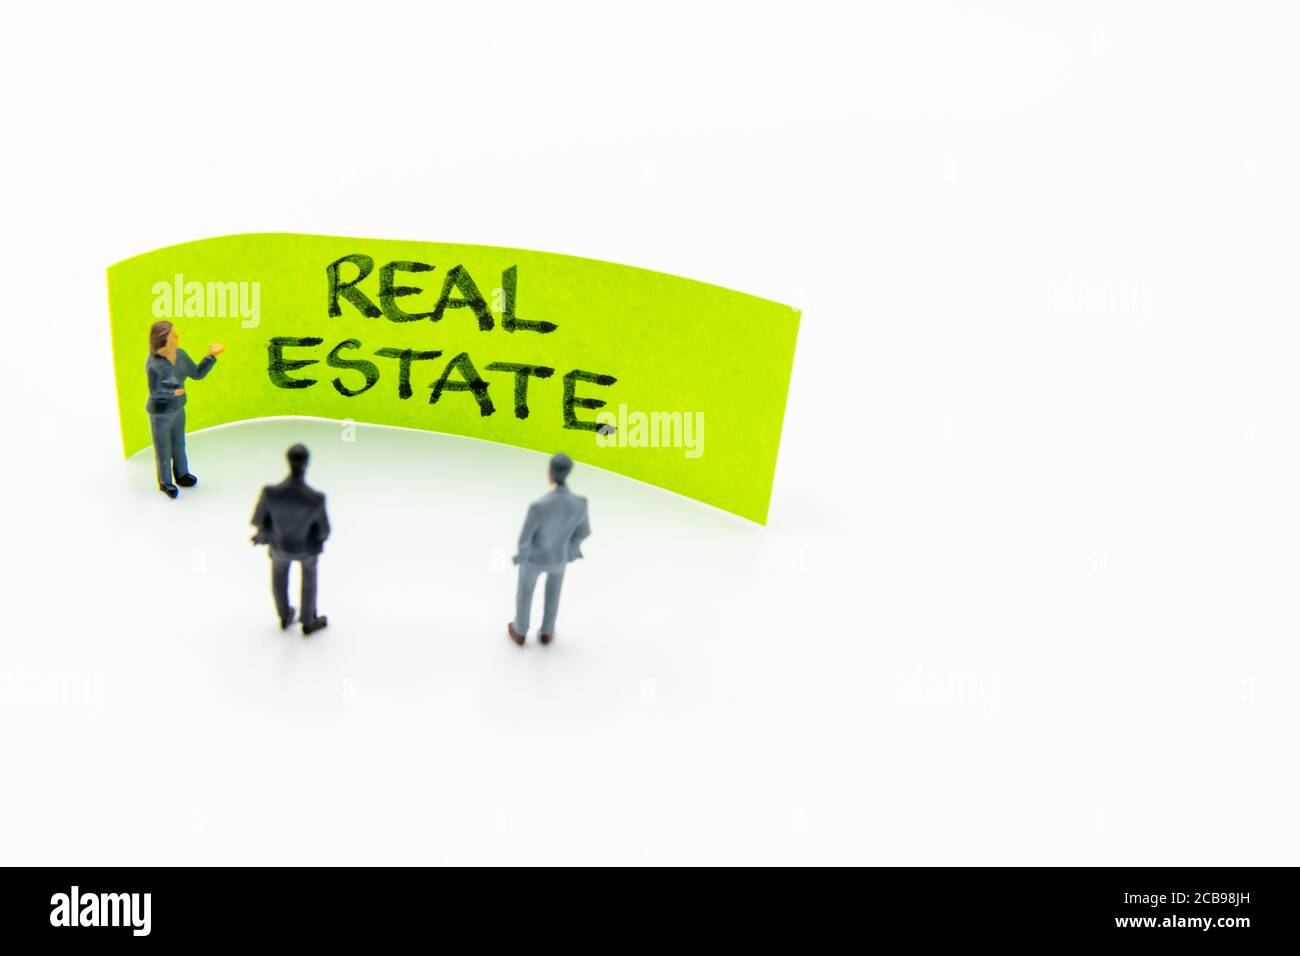 Presentation meeting with miniature figurines posed as business people standing in front of post-it note with Real Estate handwritten message in backg Stock Photo